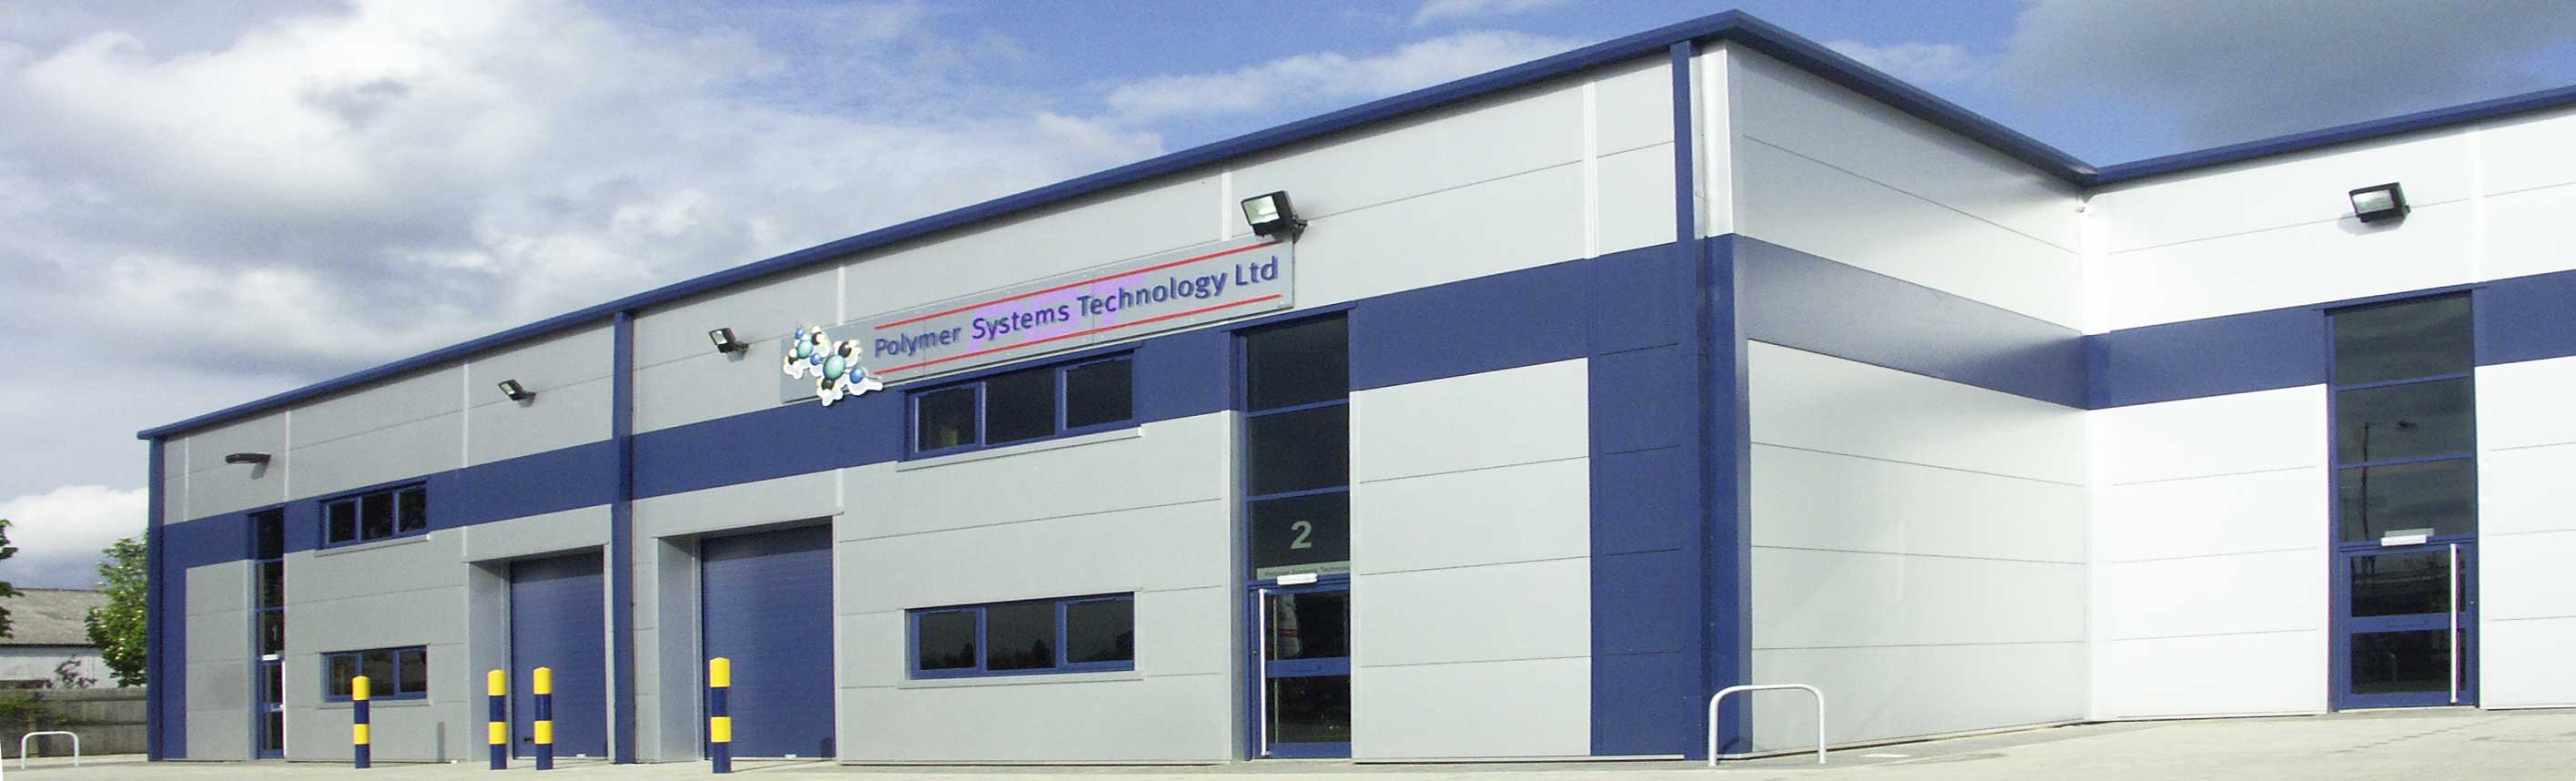 PST - Home of Silicone High Wycombe